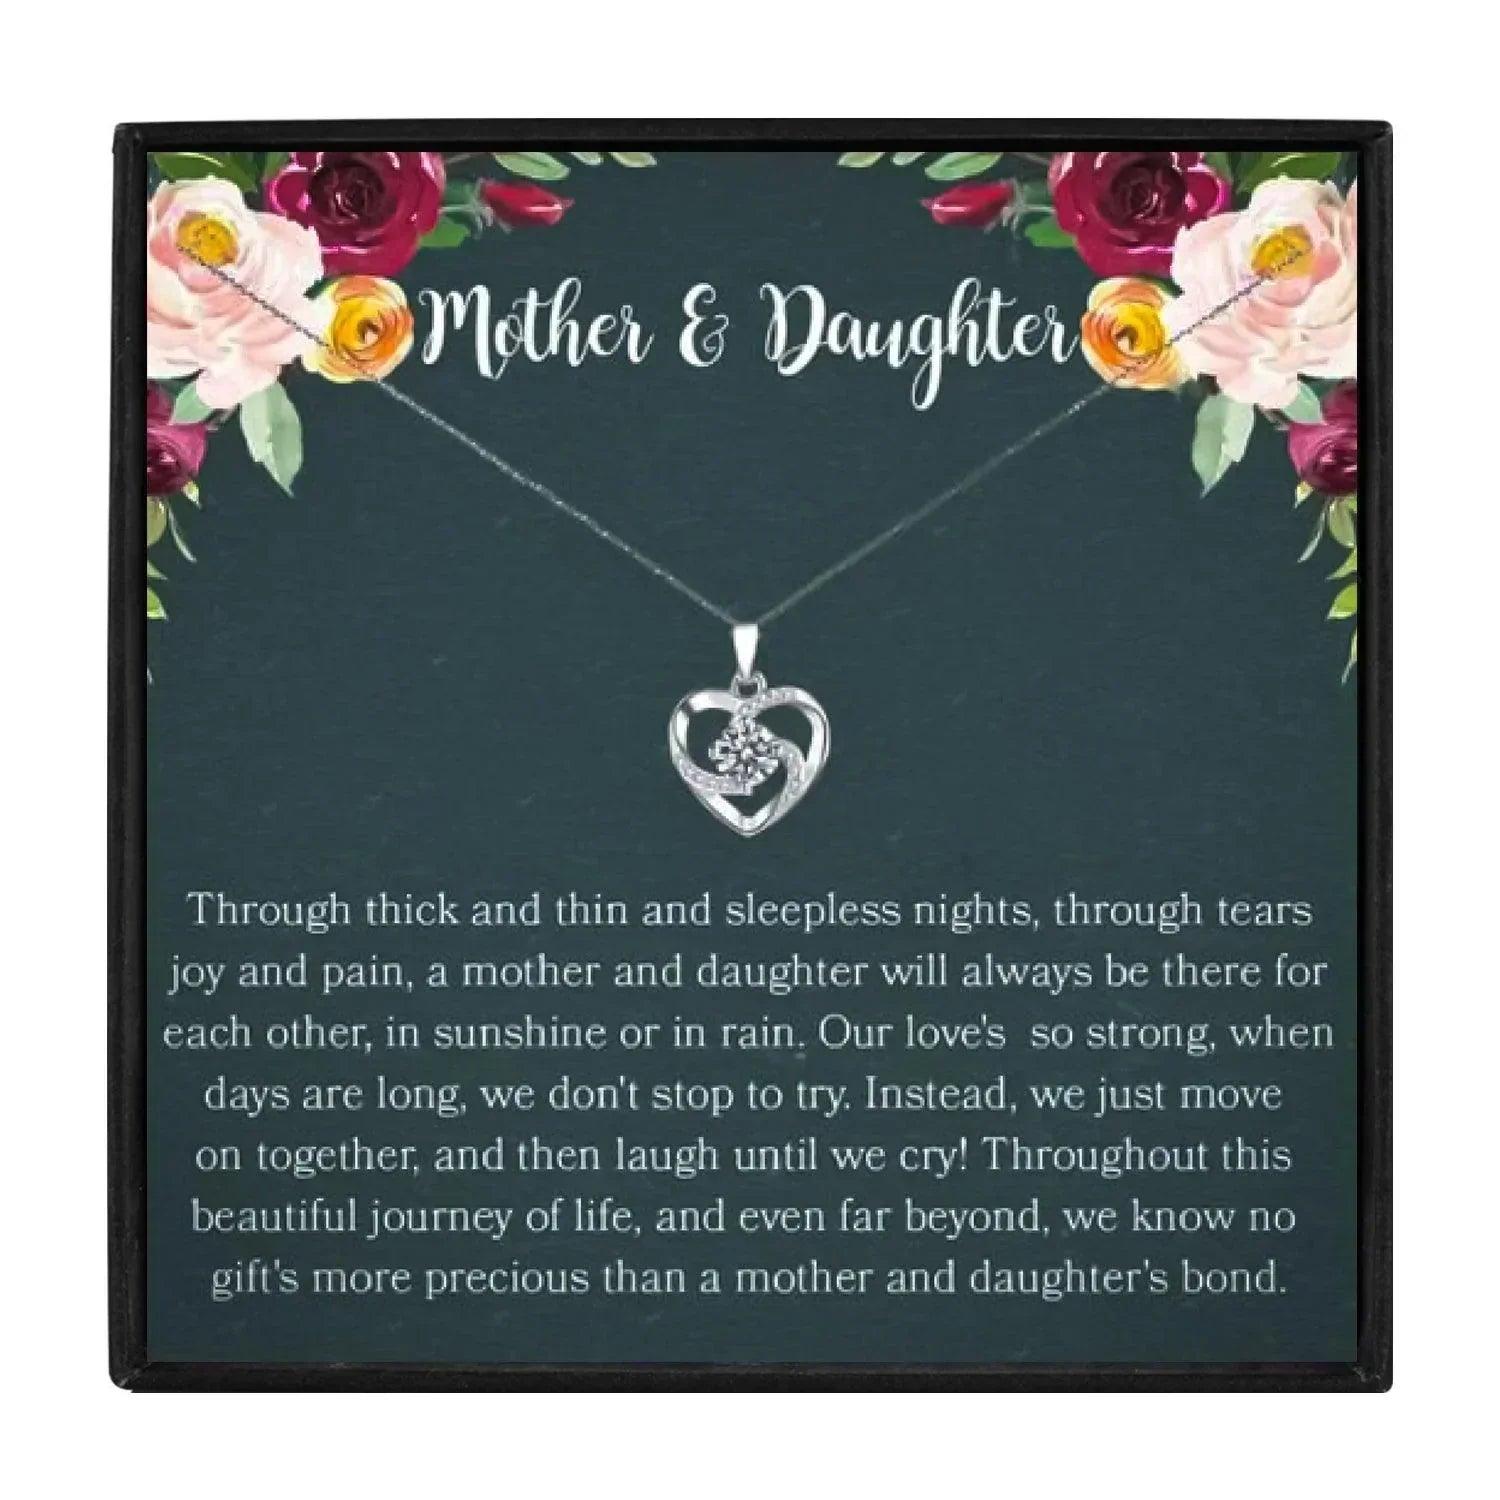 Mother Daughter Heart Pendant Necklaces for Christmas 2023 | Mother Daughter Heart Pendant Necklaces - undefined | daughter gift ideas, mother and daughter, Mother and Daughter Heart Necklaces, Mother Daughter Gift Necklace | From Hunny Life | hunnylife.com